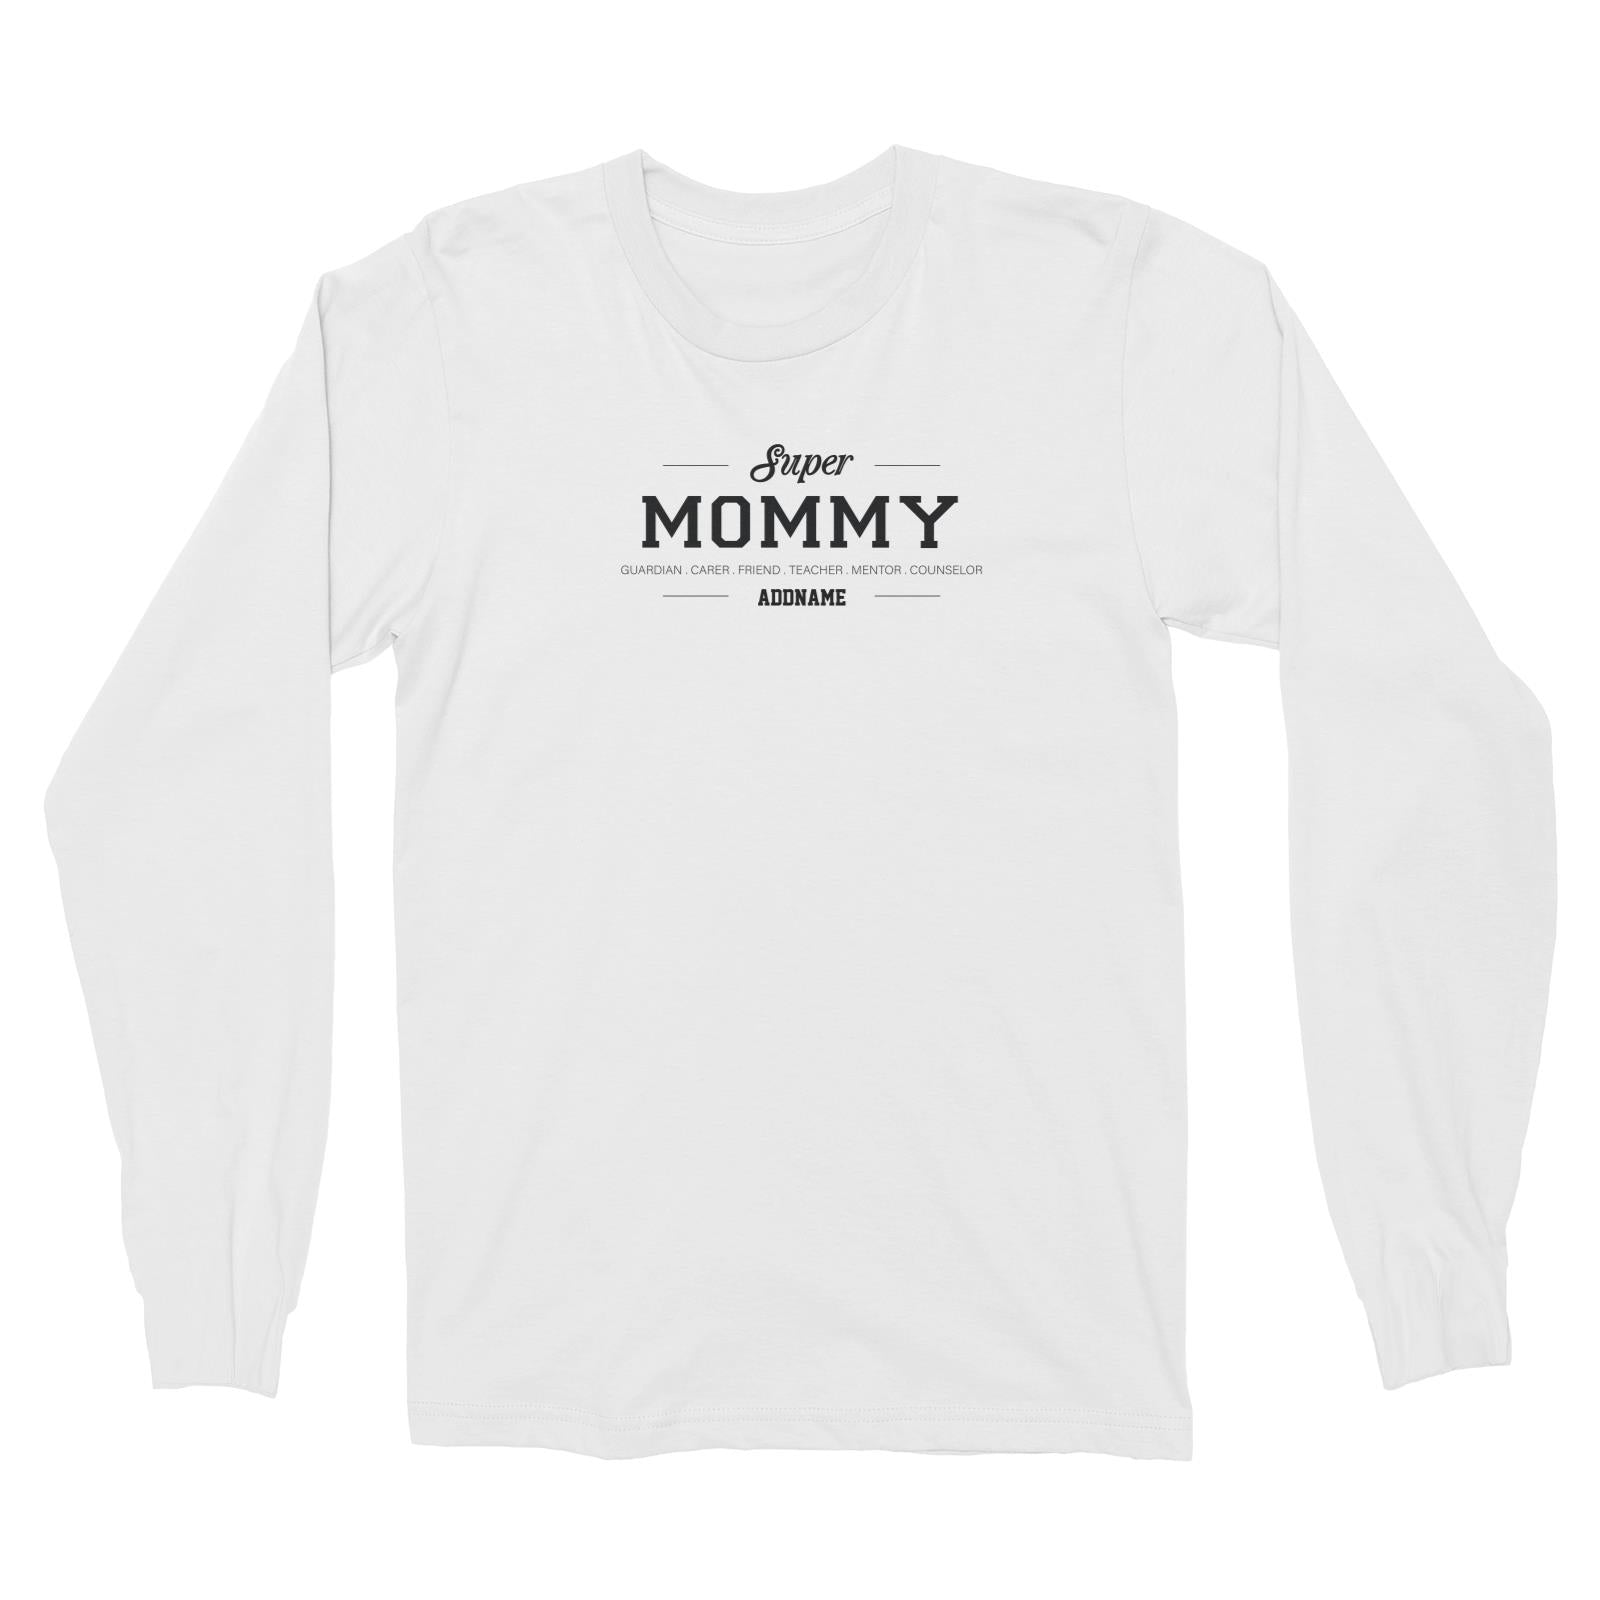 Super Definition Family Super Mommy Addname Long Sleeve Unisex T-Shirt